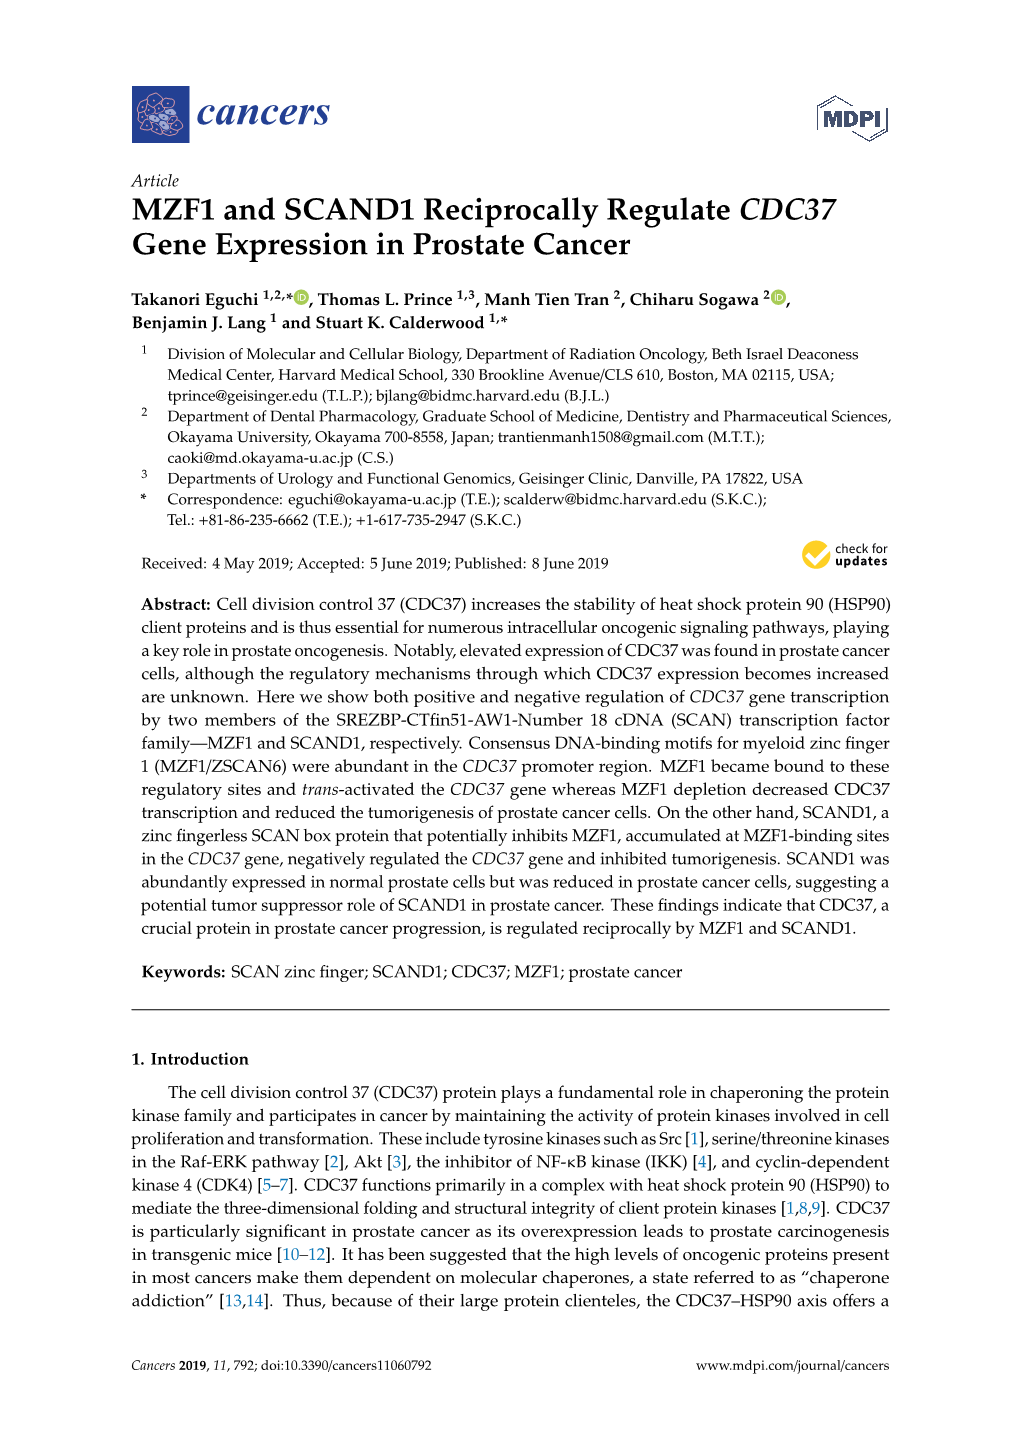 MZF1 and SCAND1 Reciprocally Regulate CDC37 Gene Expression in Prostate Cancer